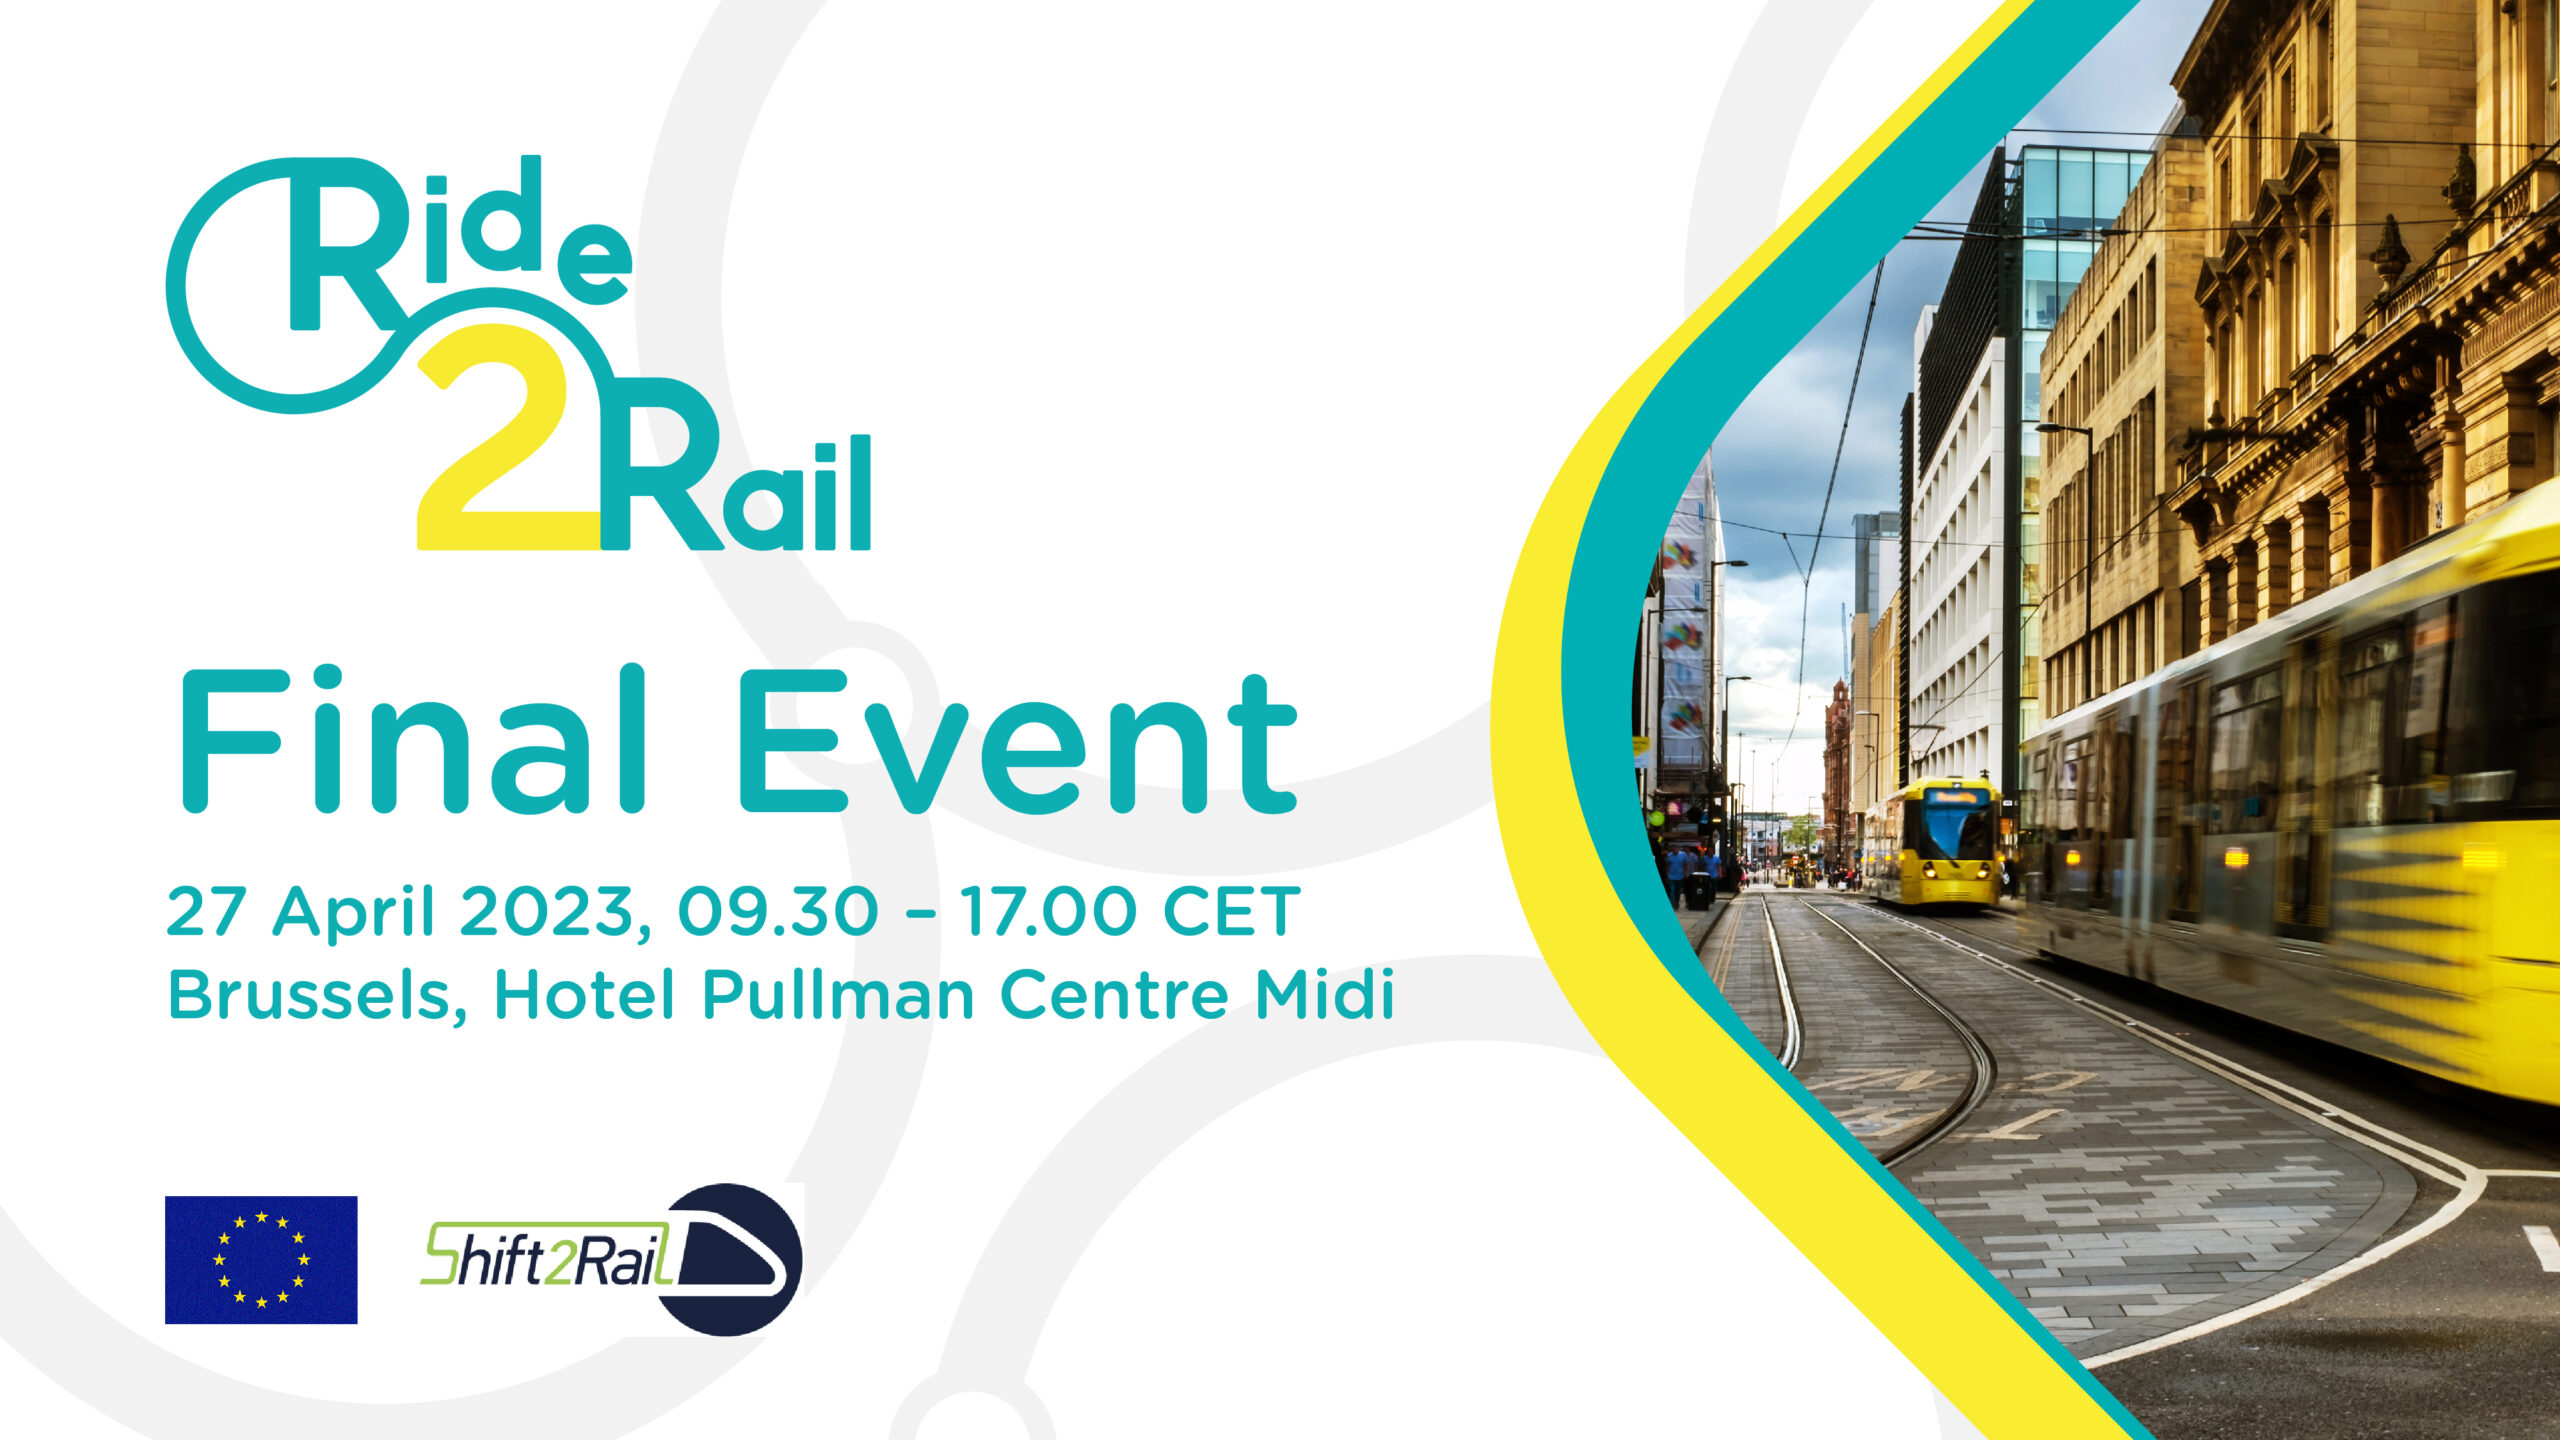 Save the Date: the RIDE2RAIL project holds its Final Event on 27 April